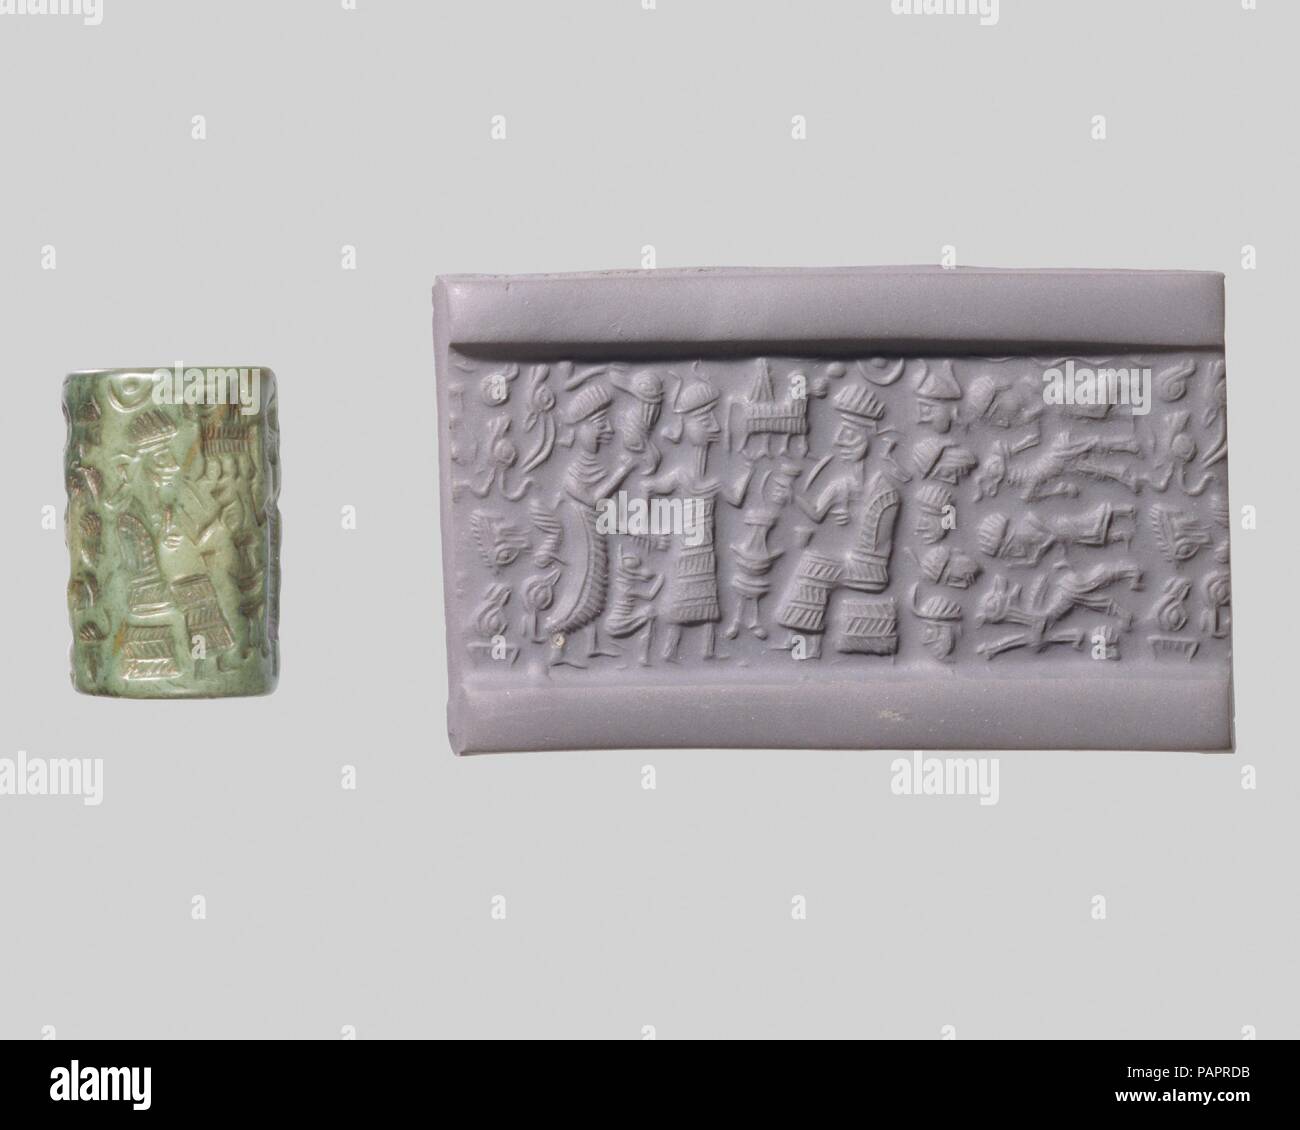 Cylinder seal and modern impression: goddess leading a worshiper to a seated deity; bull god. Culture: Old Assyrian Trading Colony. Dimensions: 0.87 in. (2.21 cm). Date: ca. 20th-19th century B.C..  Although engraved stones had been used as early as the seventh millennium B.C. to stamp impressions in clay, the invention in the fourth millennium B.C. of carved cylinders that could be rolled over clay allowed the development of more complex seal designs. These cylinder seals, first used in Mesopotamia, served as a mark of ownership or identification. Seals were either impressed on lumps of clay  Stock Photo